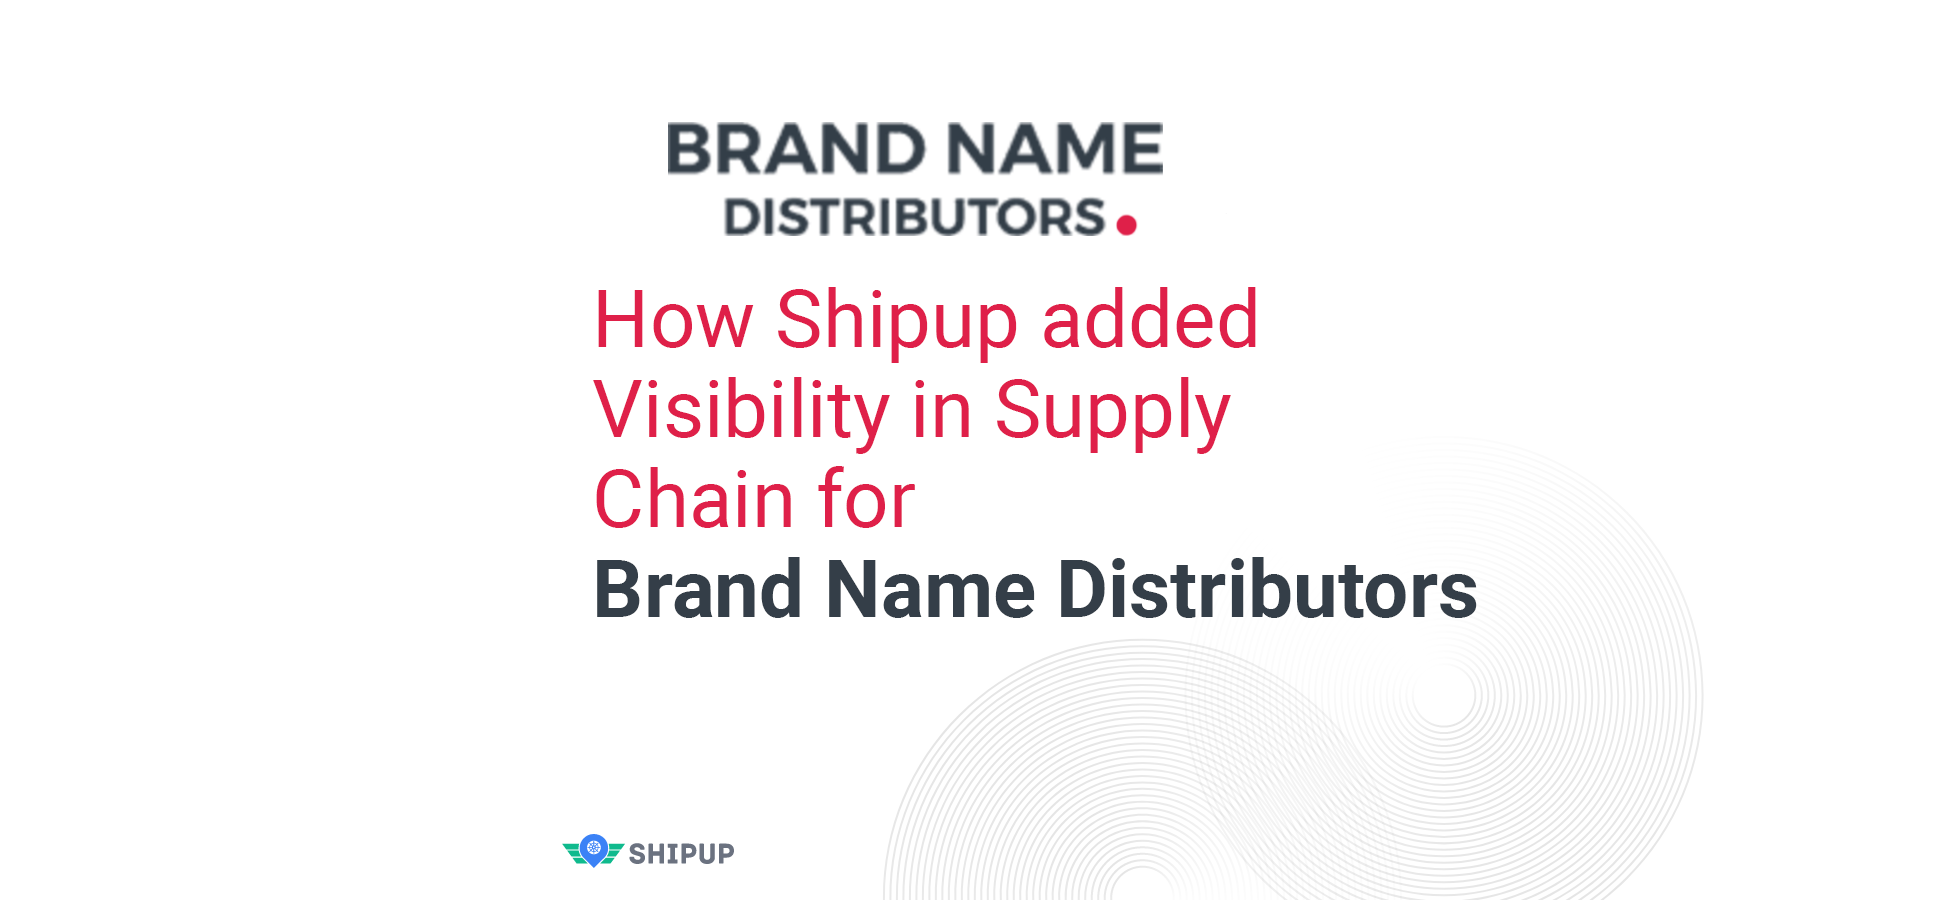 How Shipup Eased the Challenges of Managing Shipments for Brand Name Distributors through listening and adapting to customers’ needs